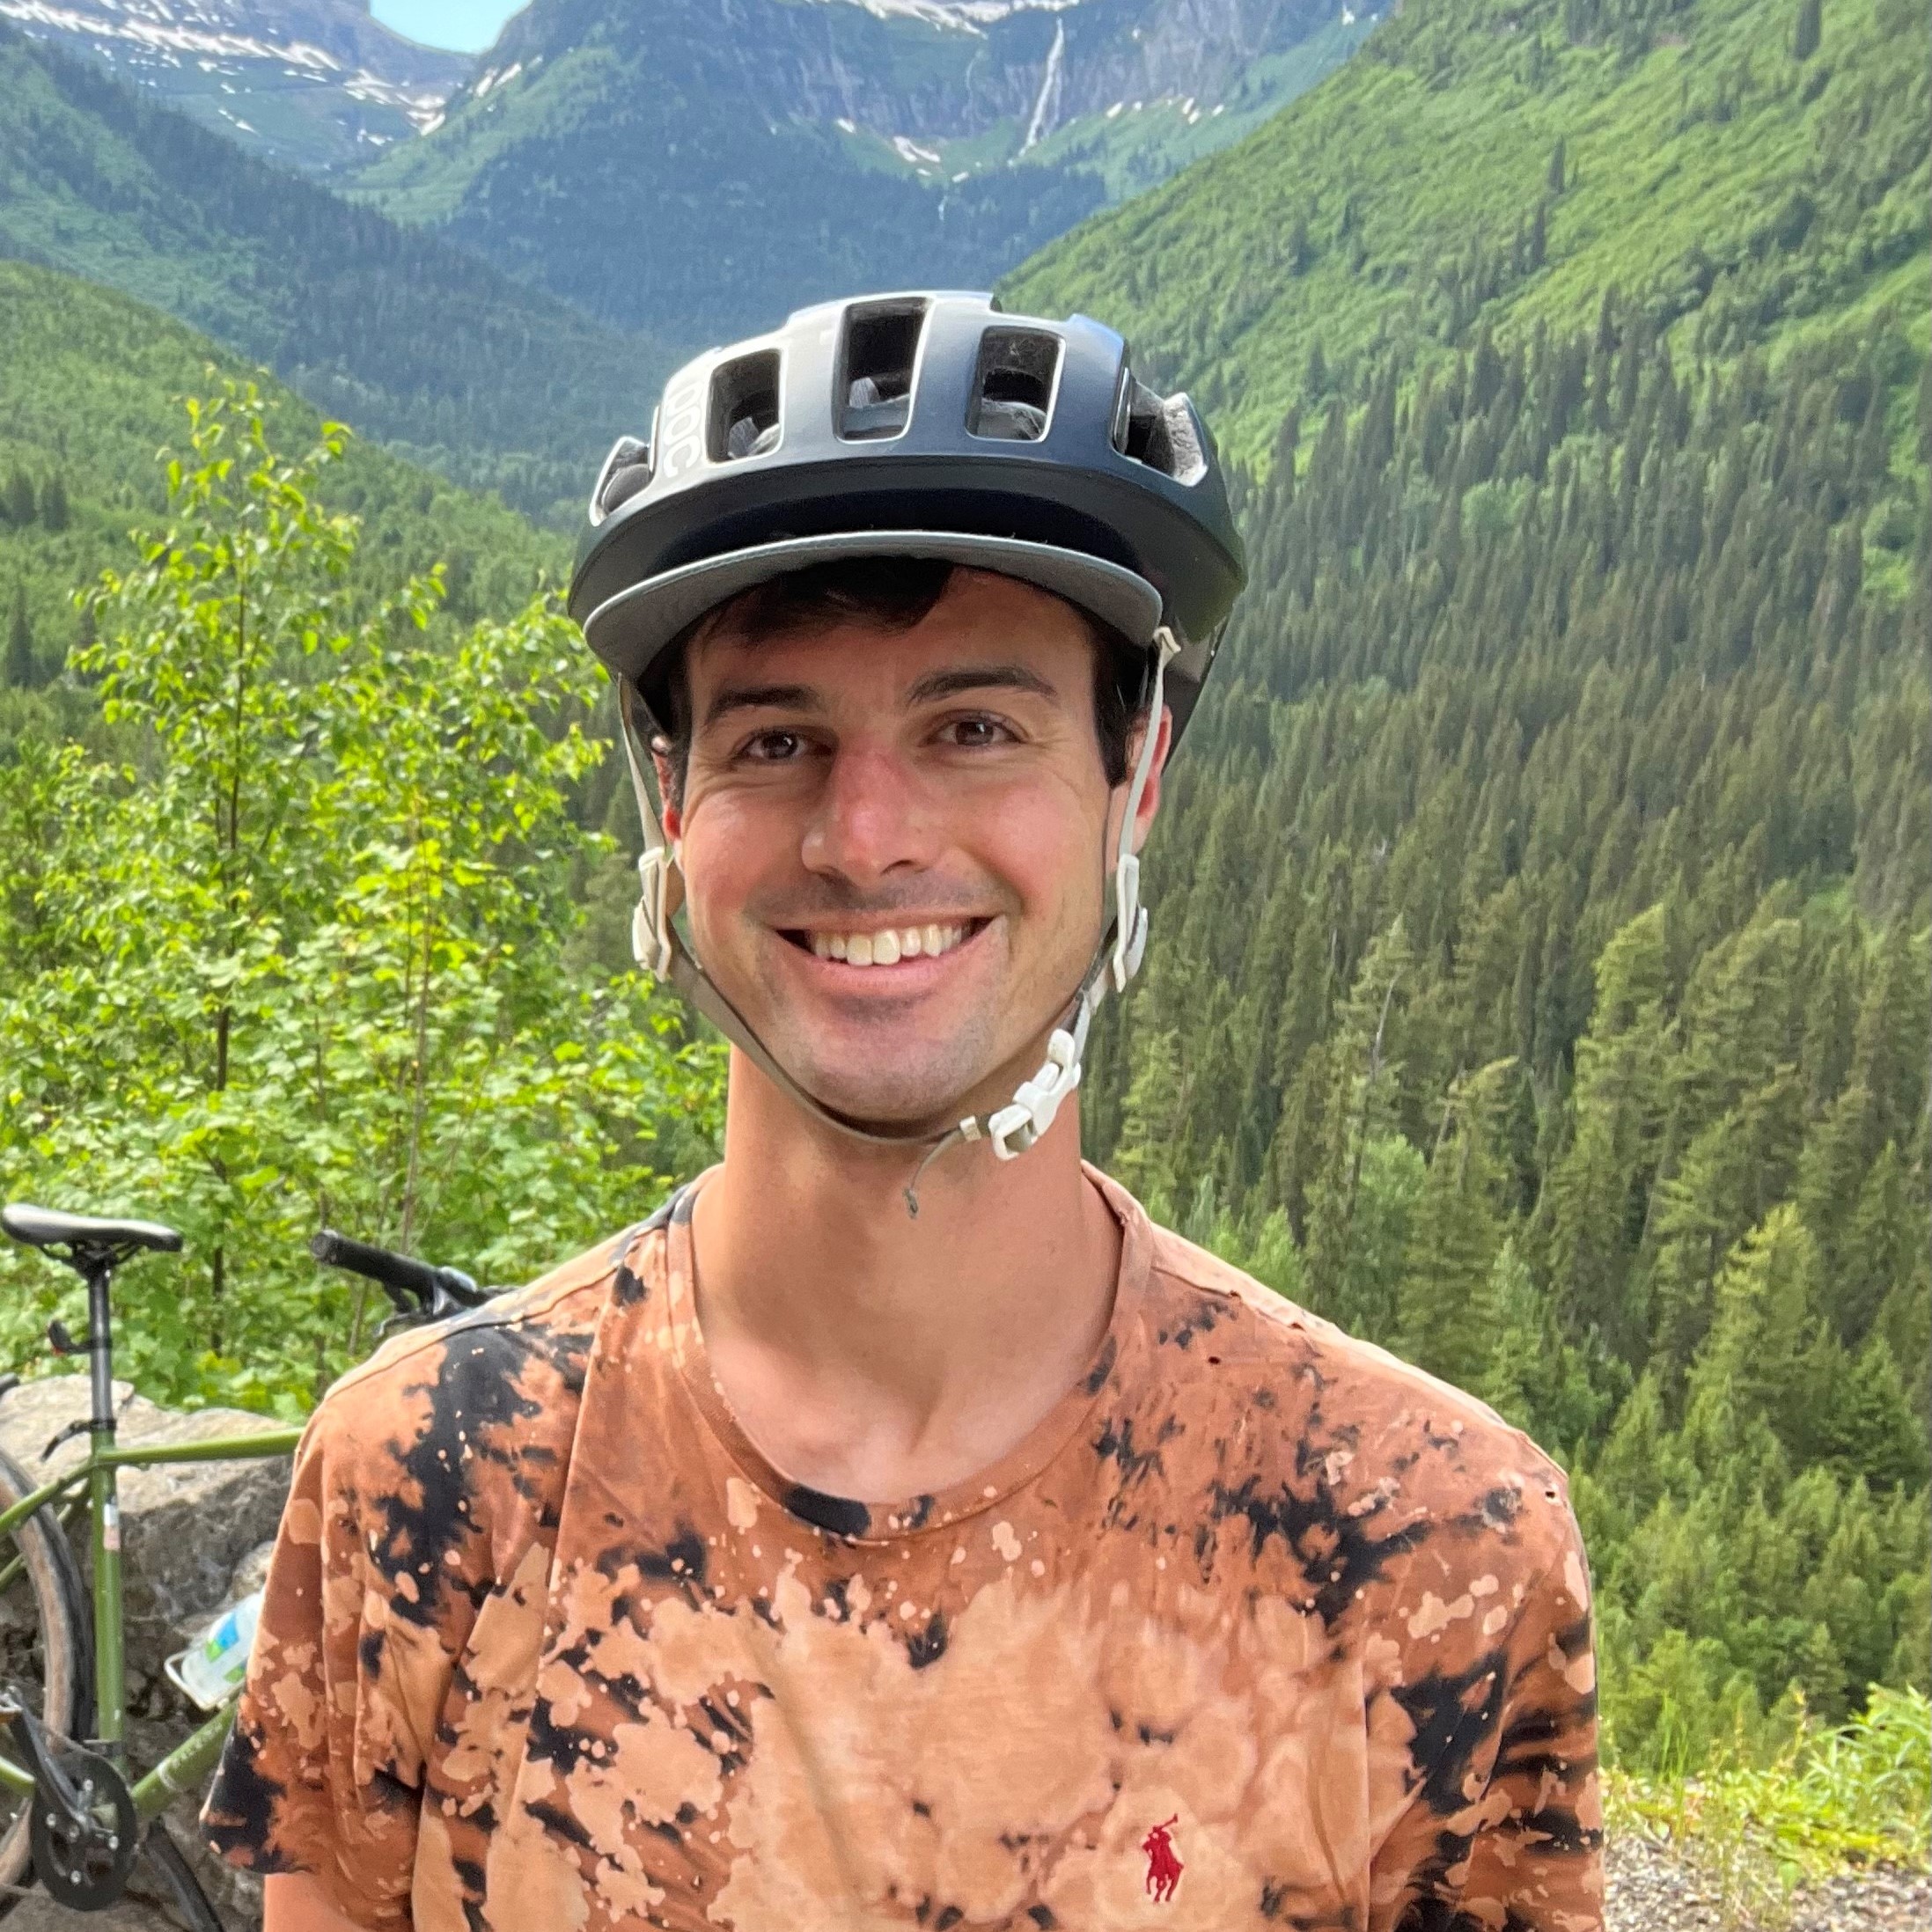 Man in bicycle helmet in forest mountain landscape